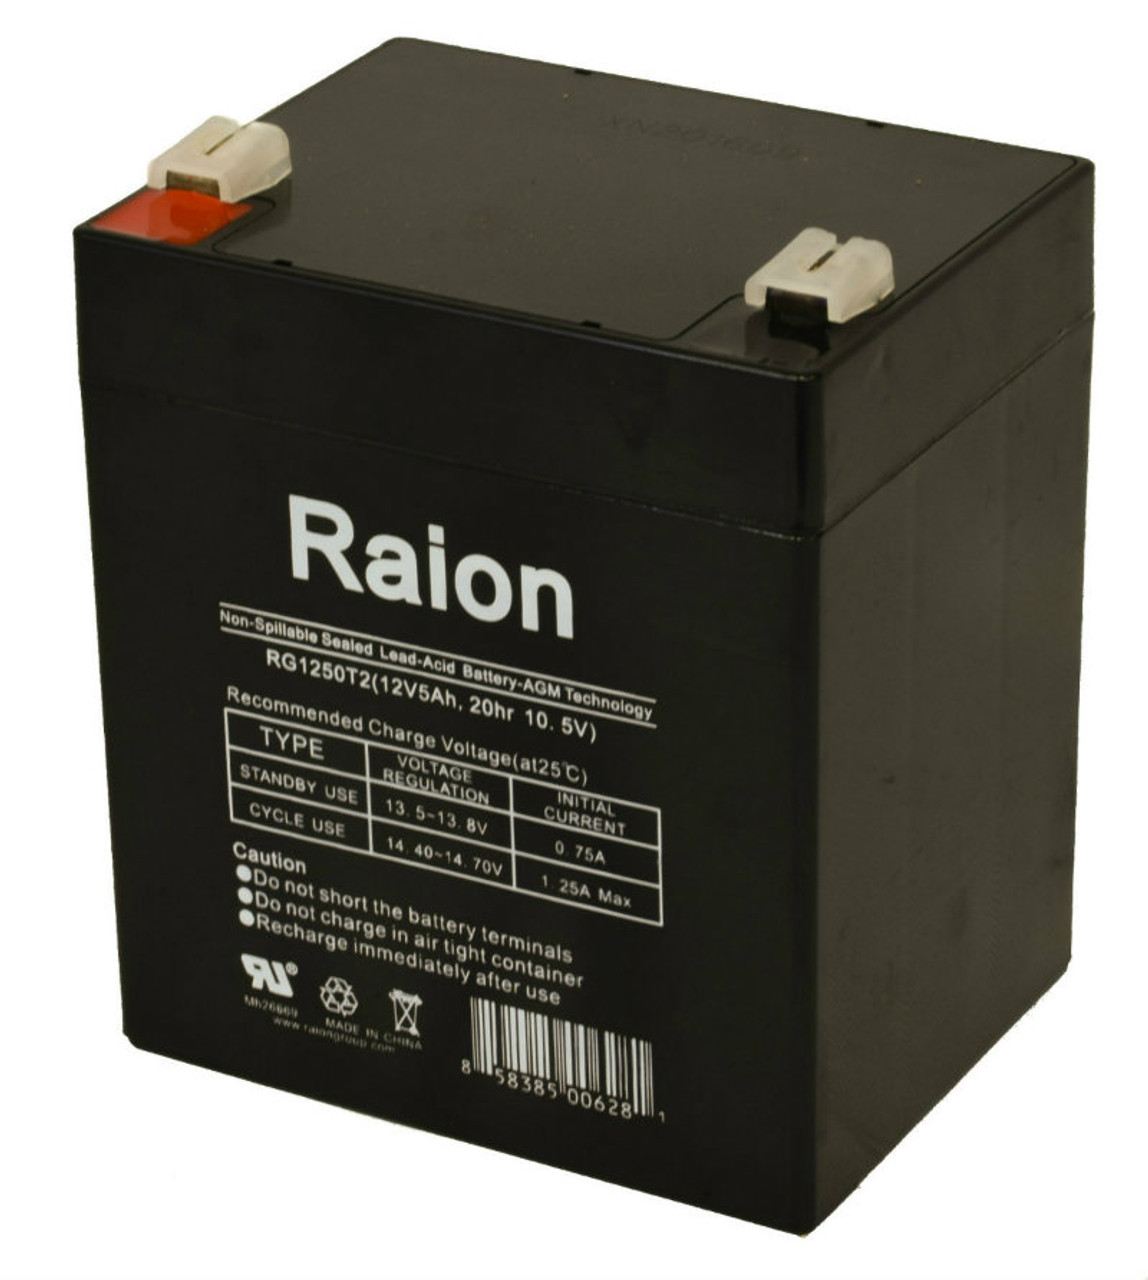 Raion Power RG1250T1 Replacement Fire Alarm Control Panel Battery for ADI 4110